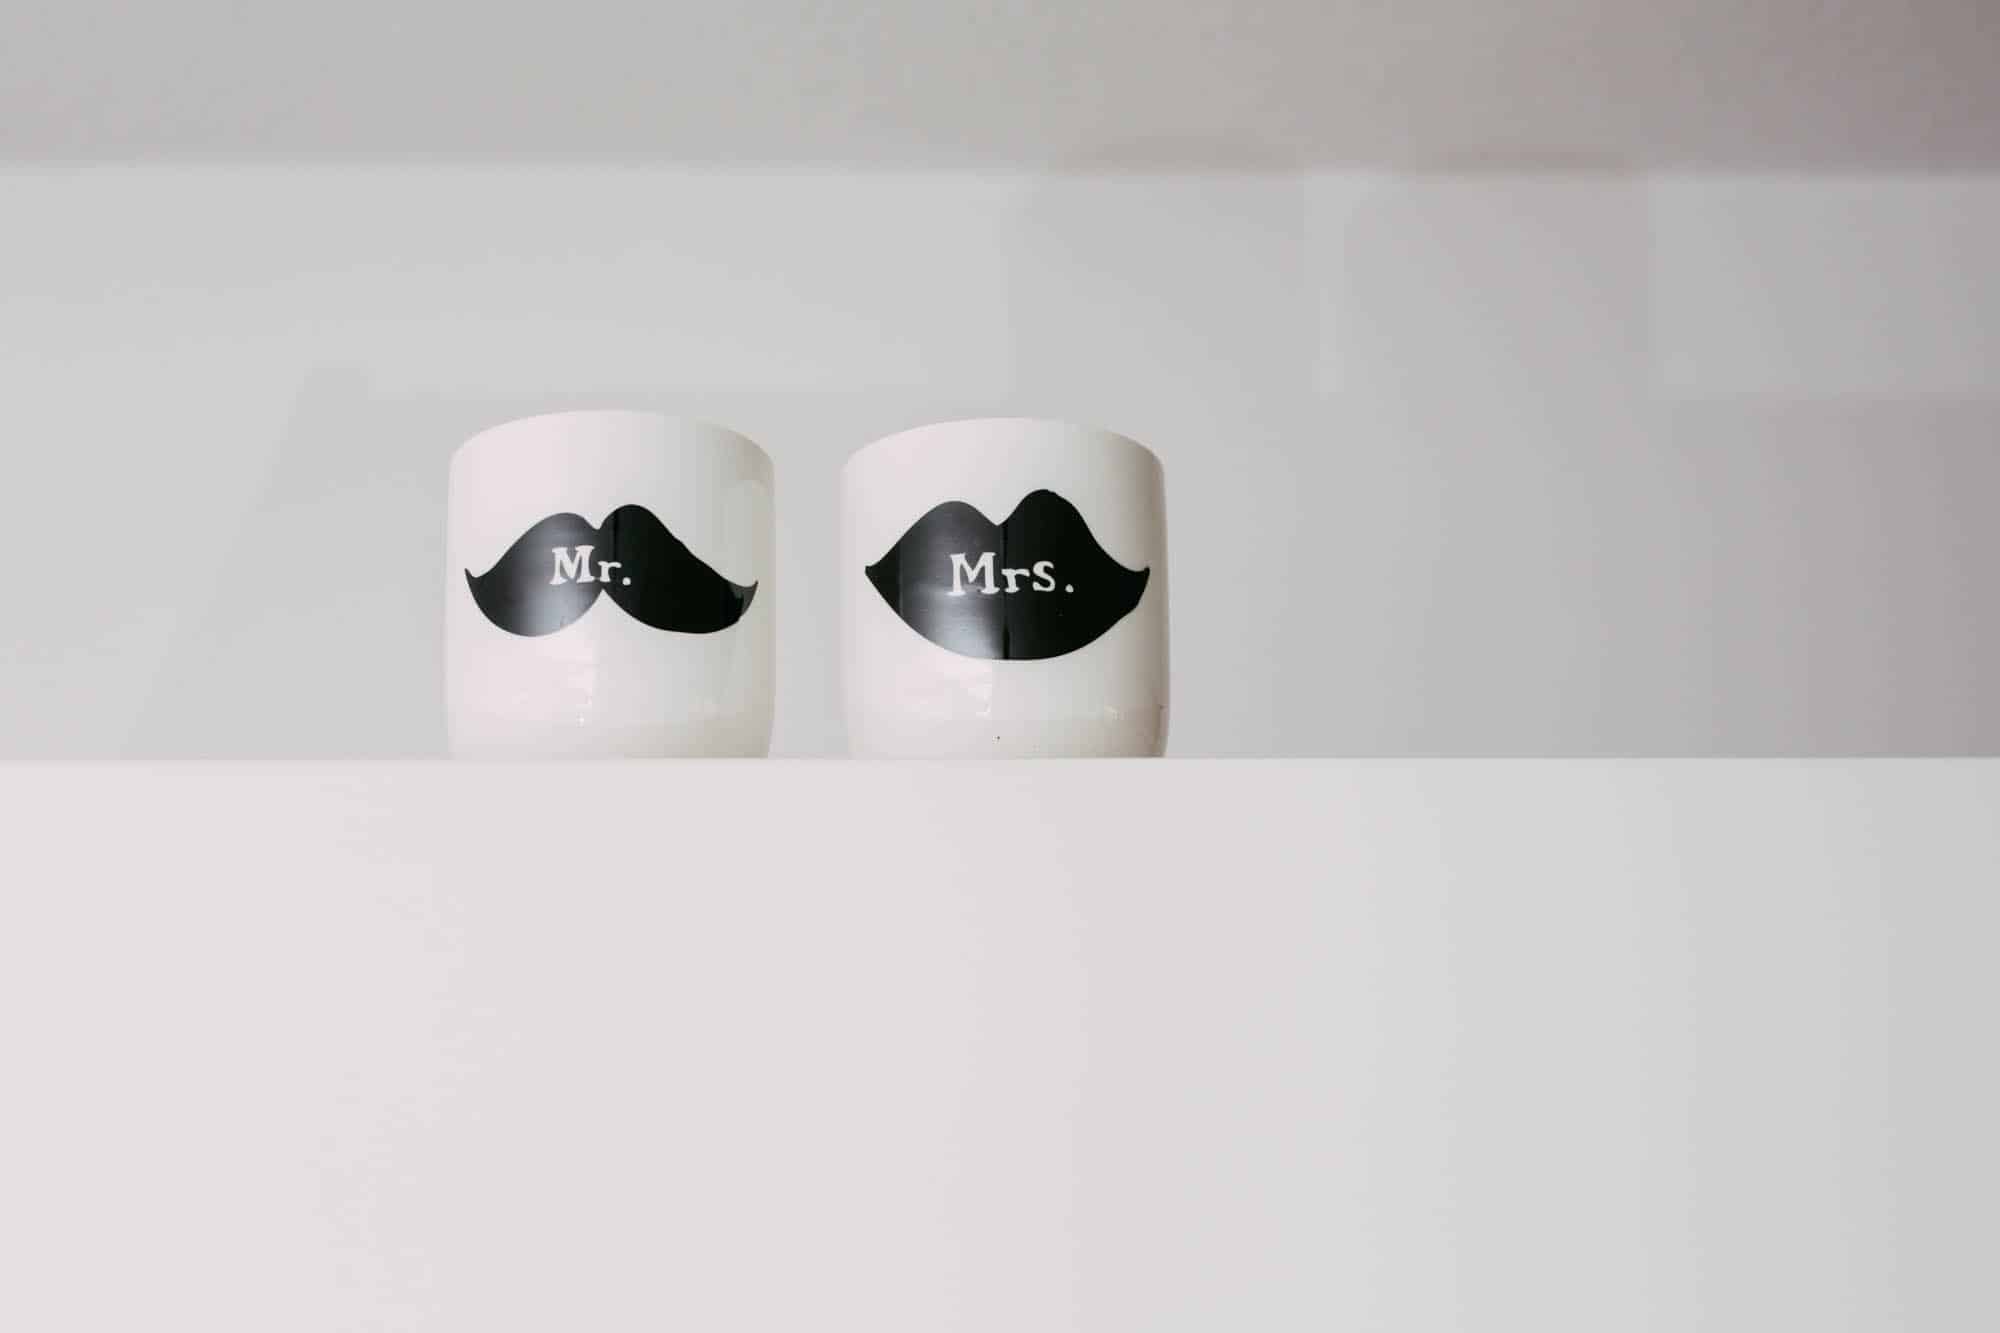 Description: Two black and white mugs with moustaches on them for a wedding day gift.